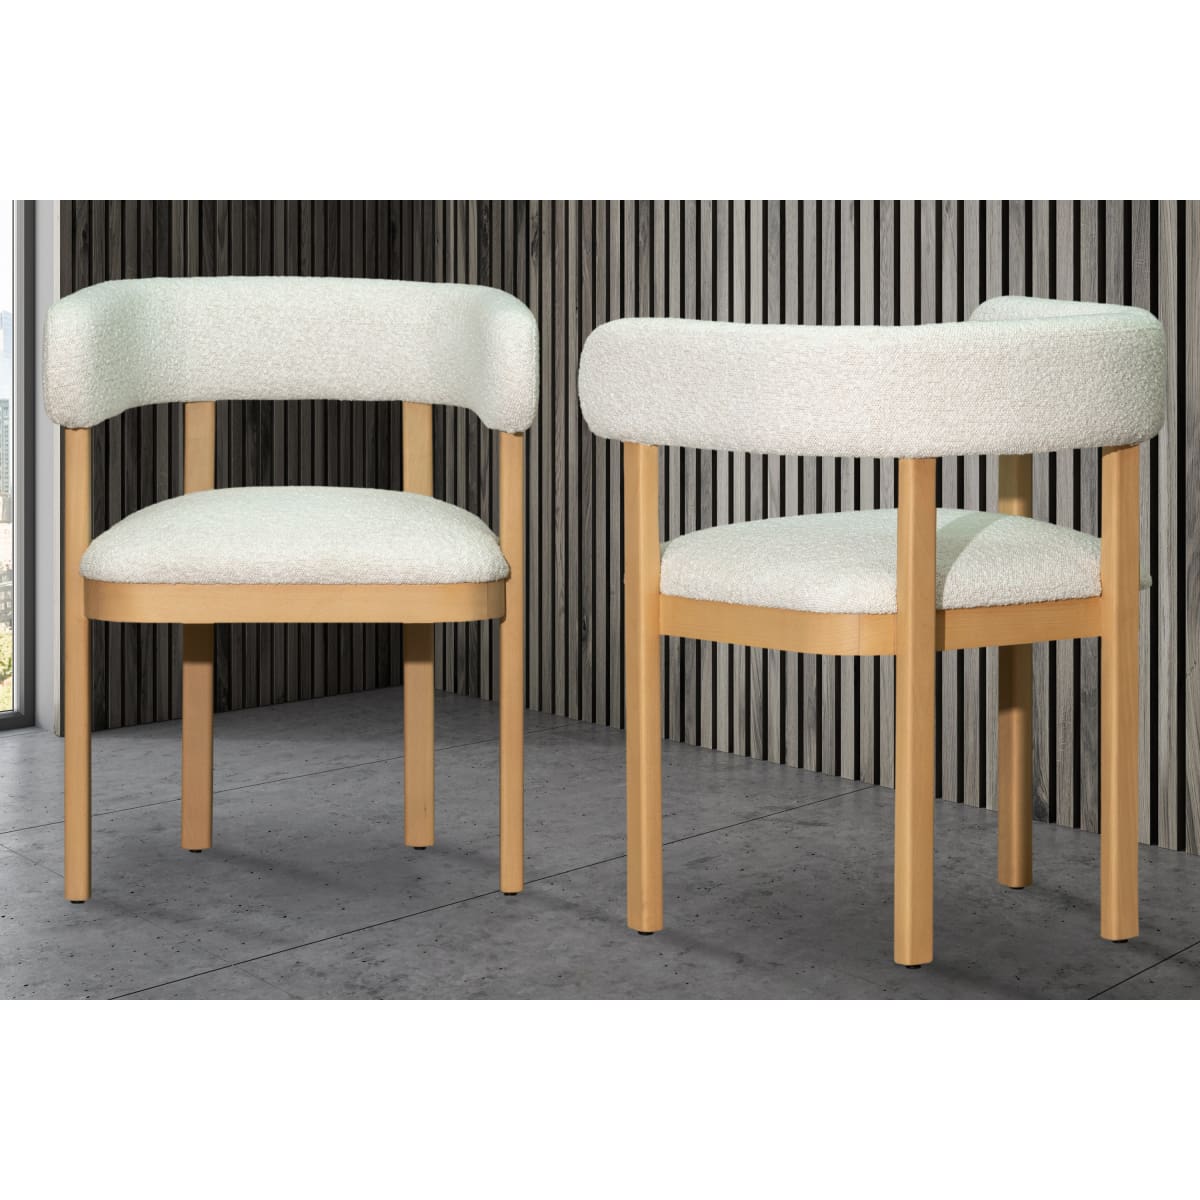 Holm Arm Chair - dining chairs